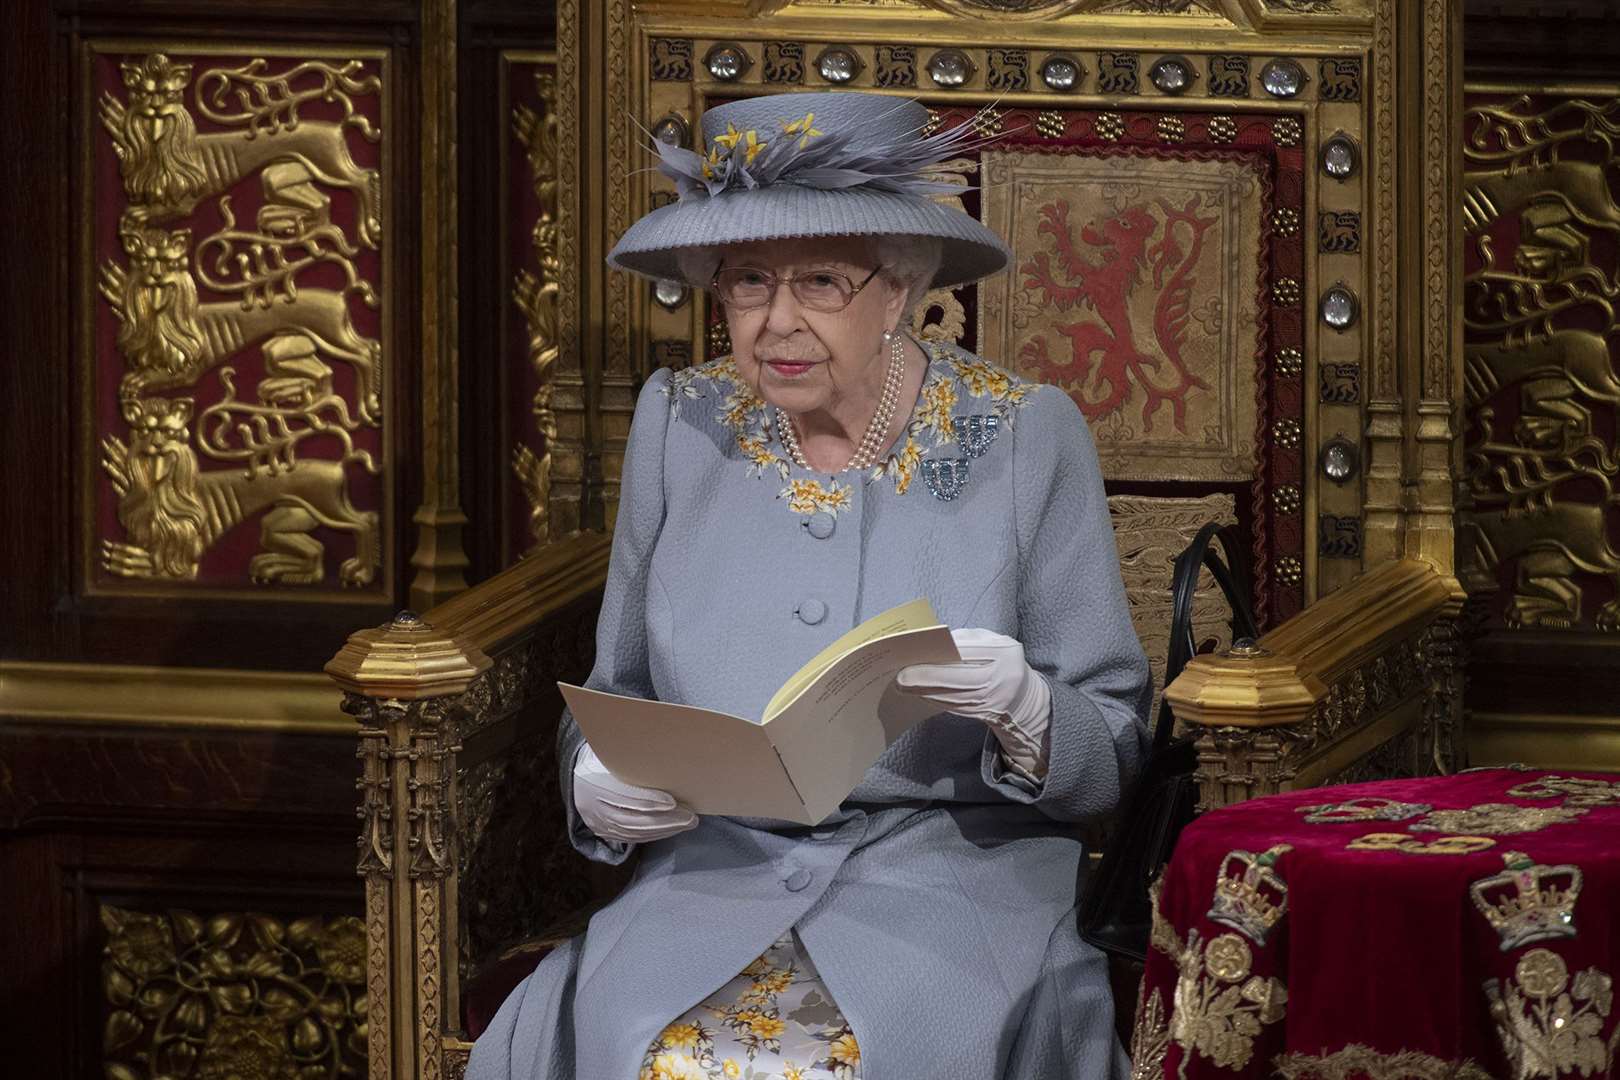 Queen Elizabeth II delivers a speech at the state opening of parliament in 2021 (Eddie Mulholland/The Daily Telegraph/PA)